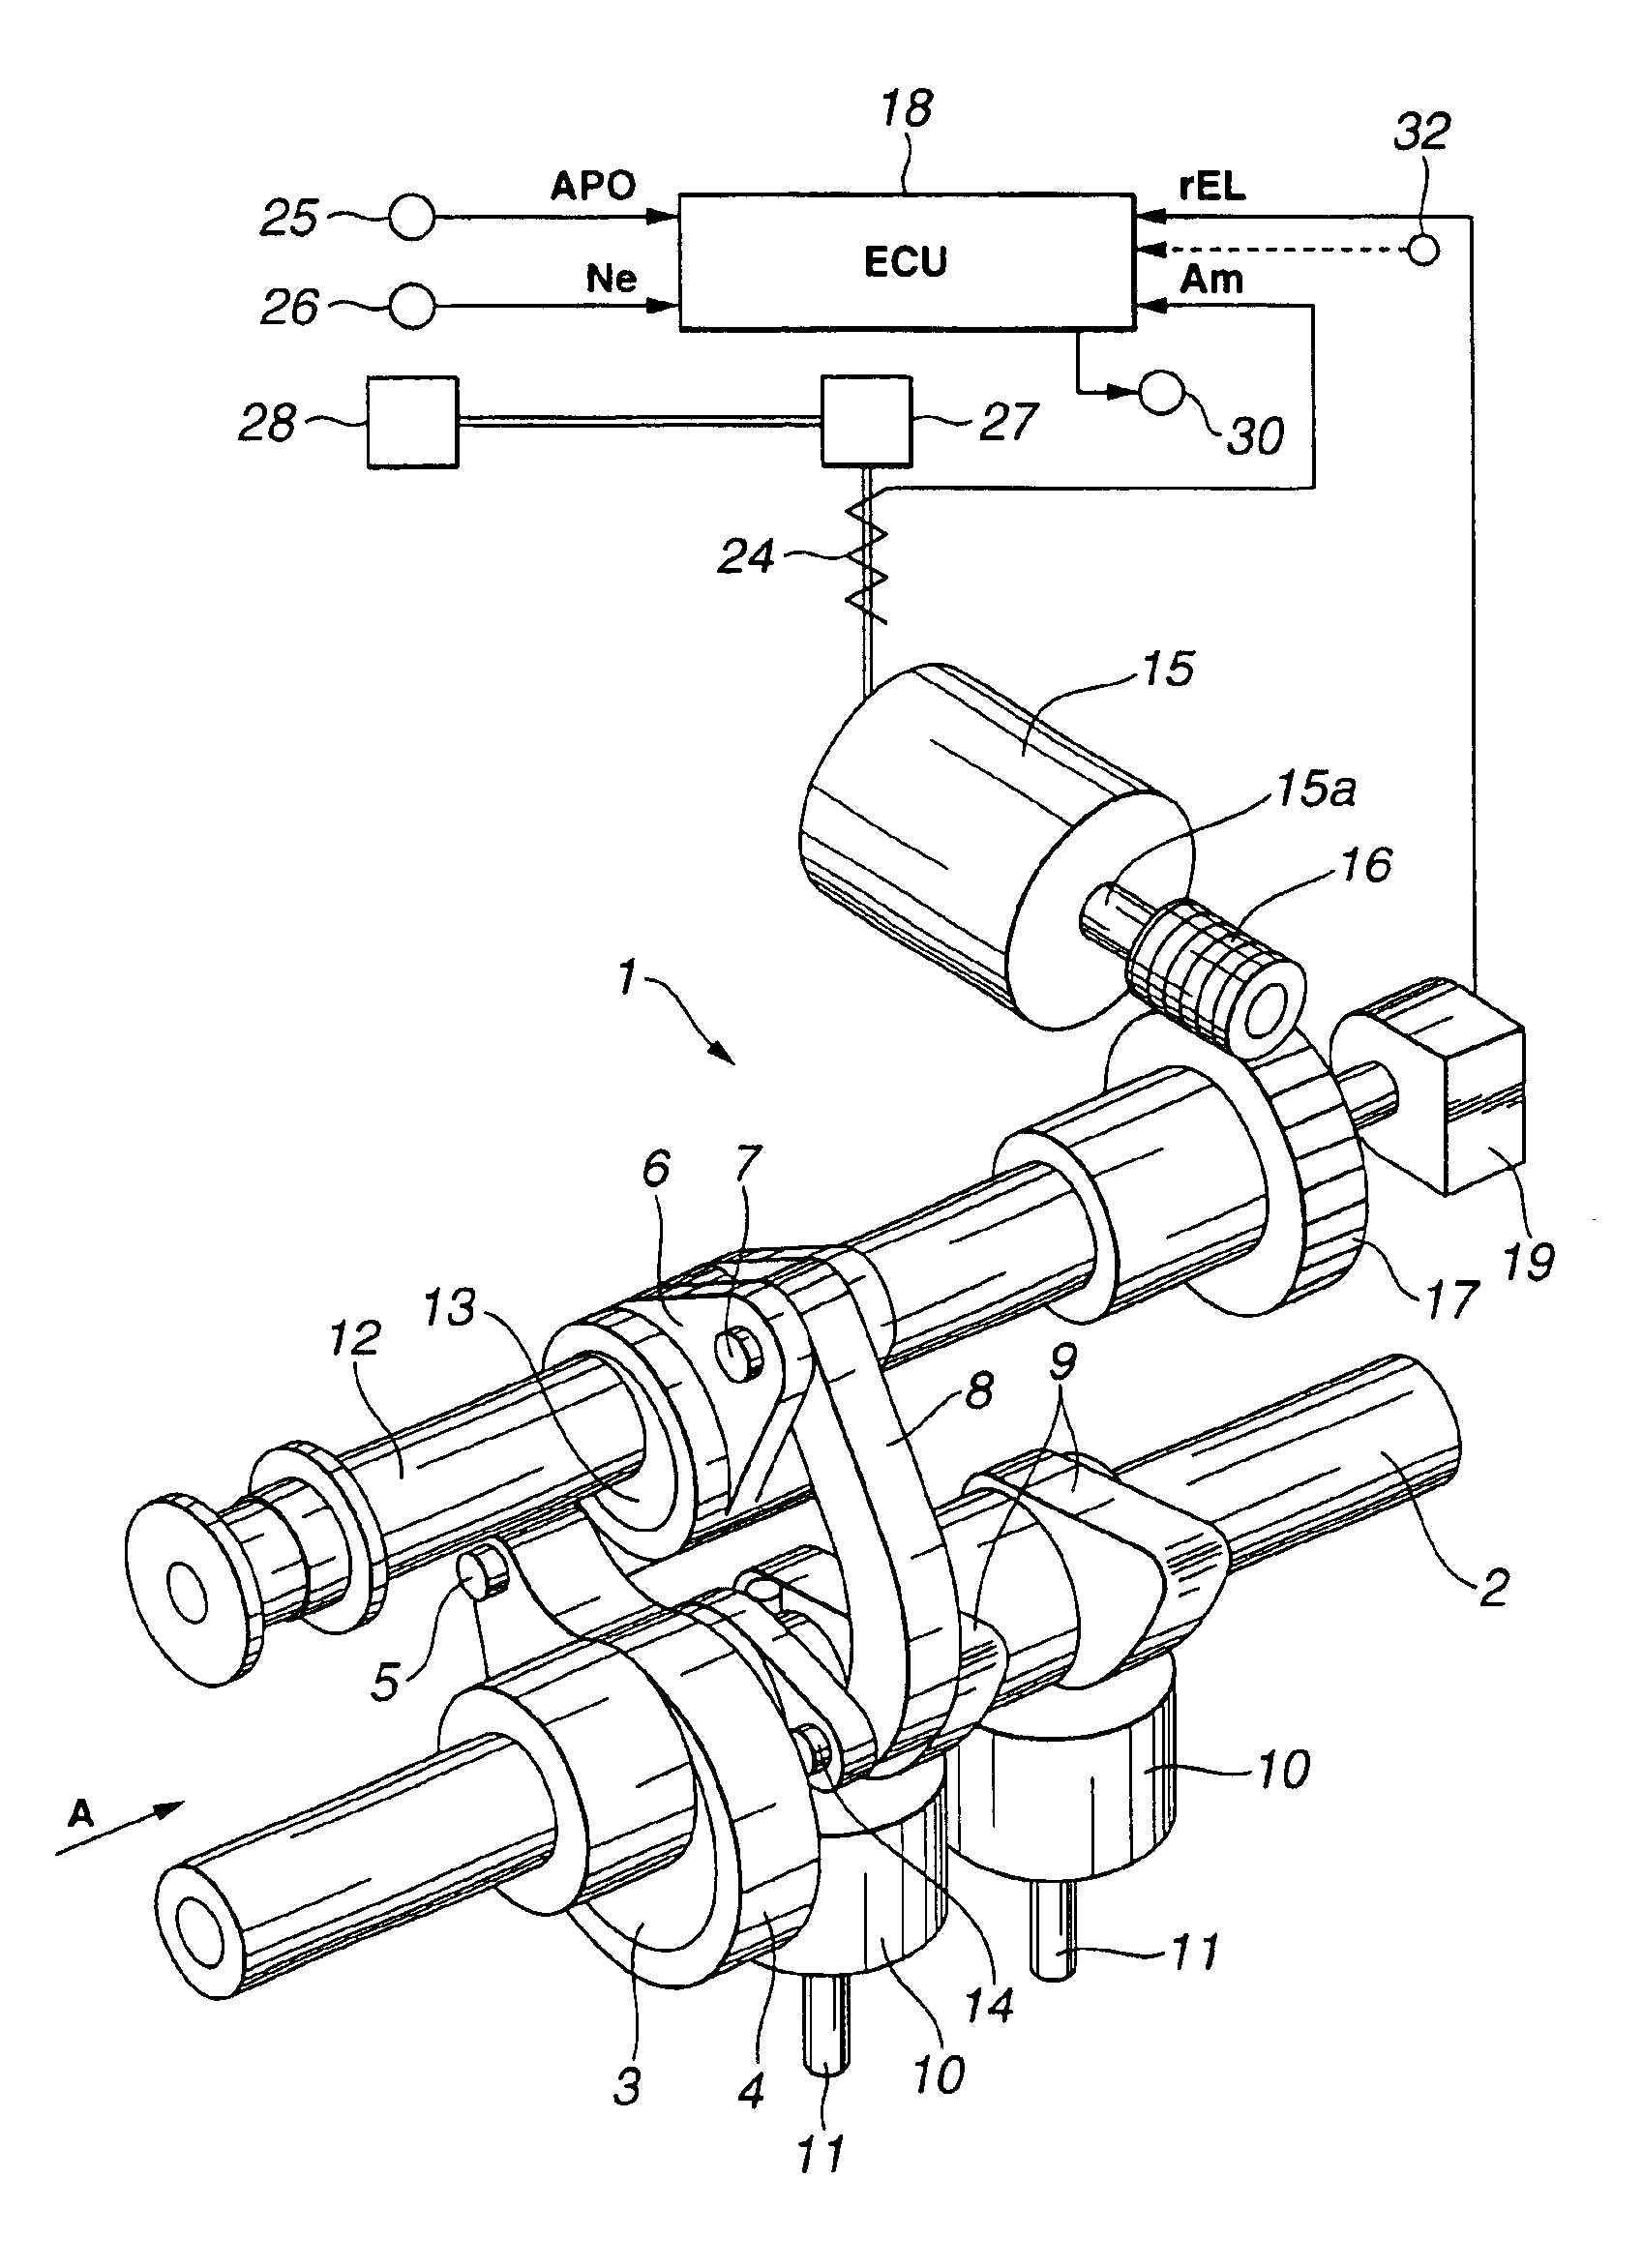 Control system and method for an internal combustion engine